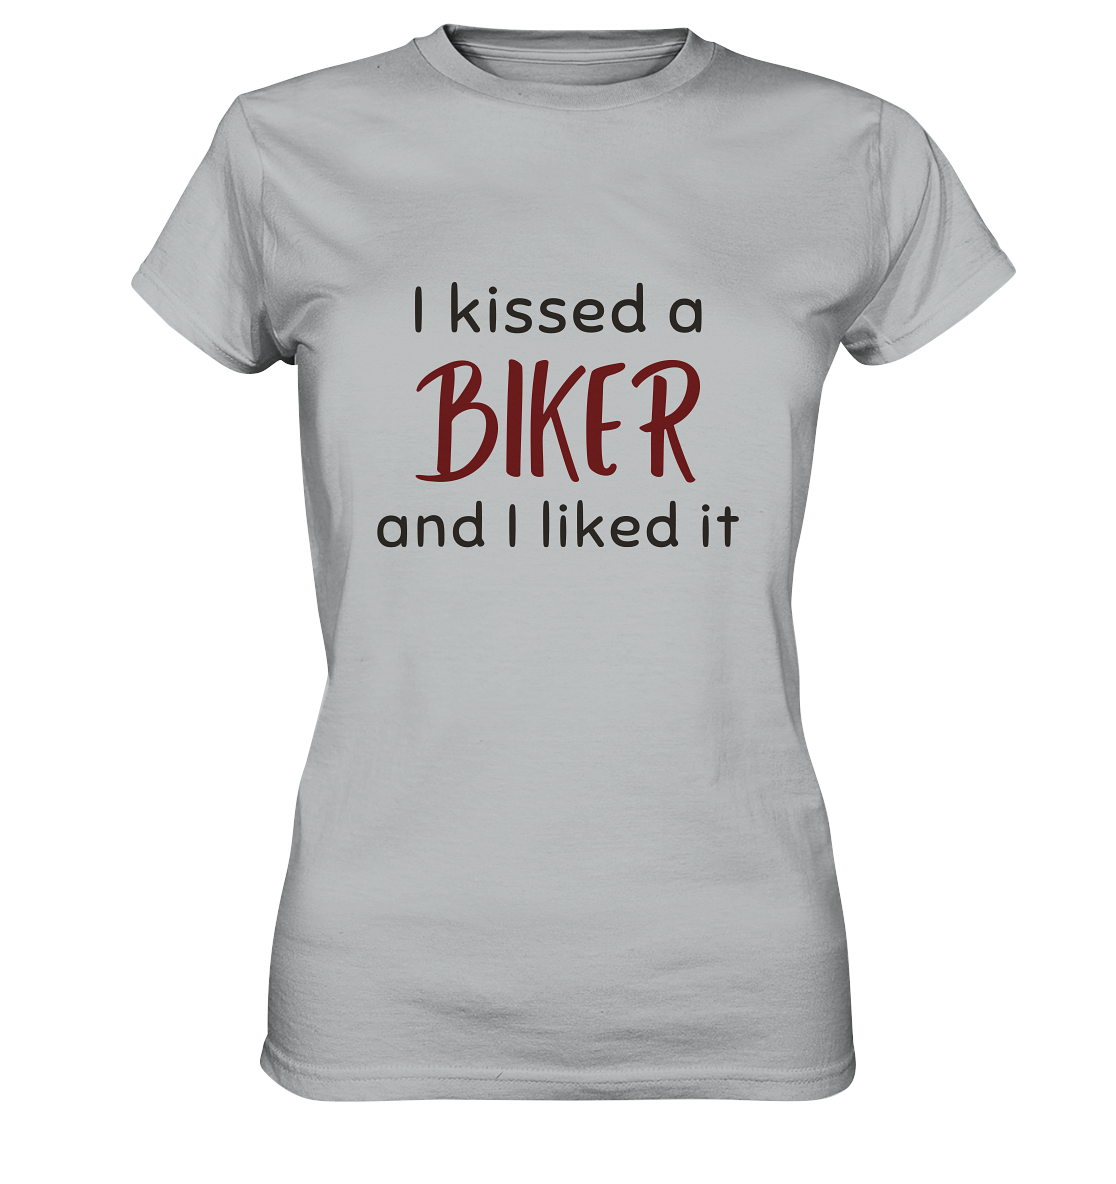 T-Shirt, Damen, ladies, spruch, quote, "I kissed a biker and I liked it", love, liebe, grau, grey